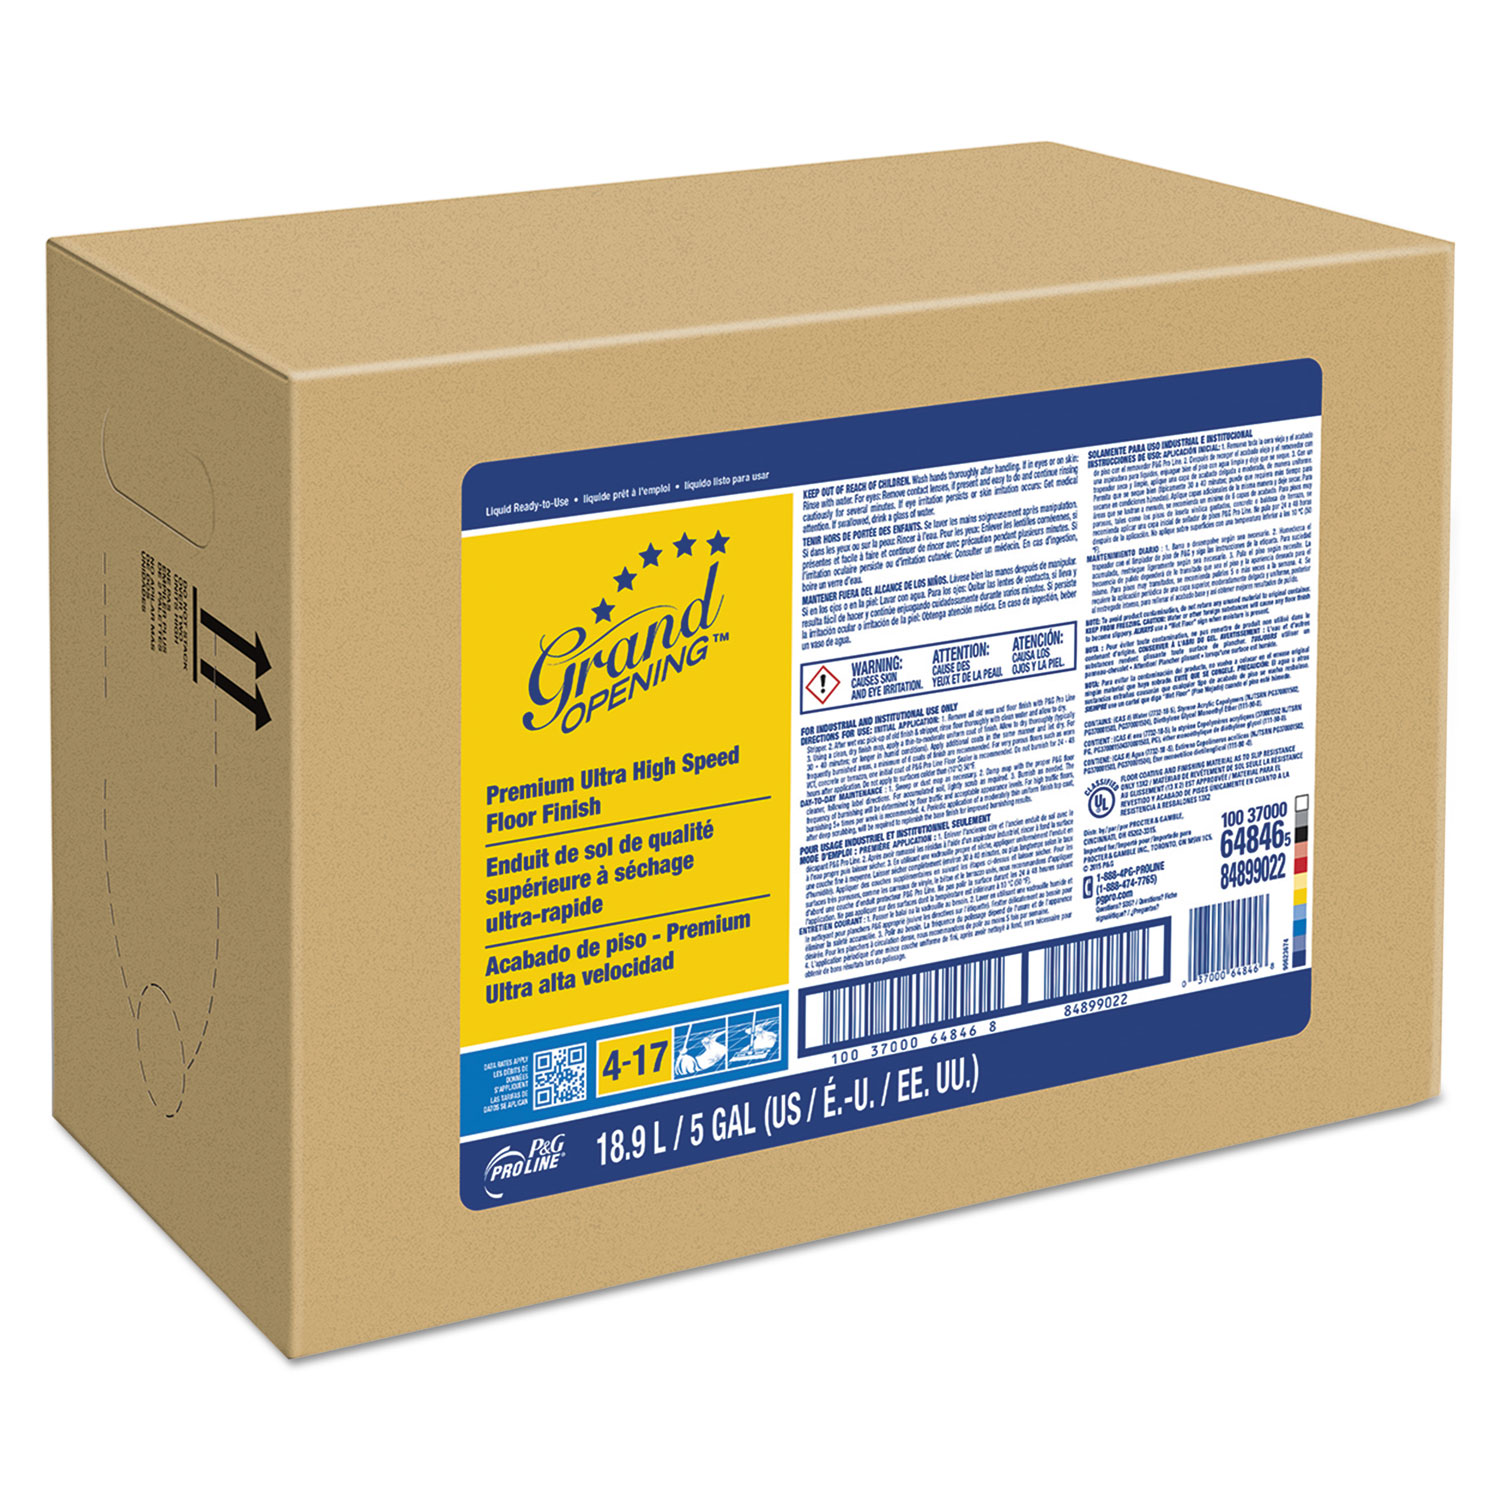  P&G Pro Line 64846 #17 Grand Opening Ultra High Speed Floor Finish, 5 Gallon Bag-in-Box (PGC64846) 